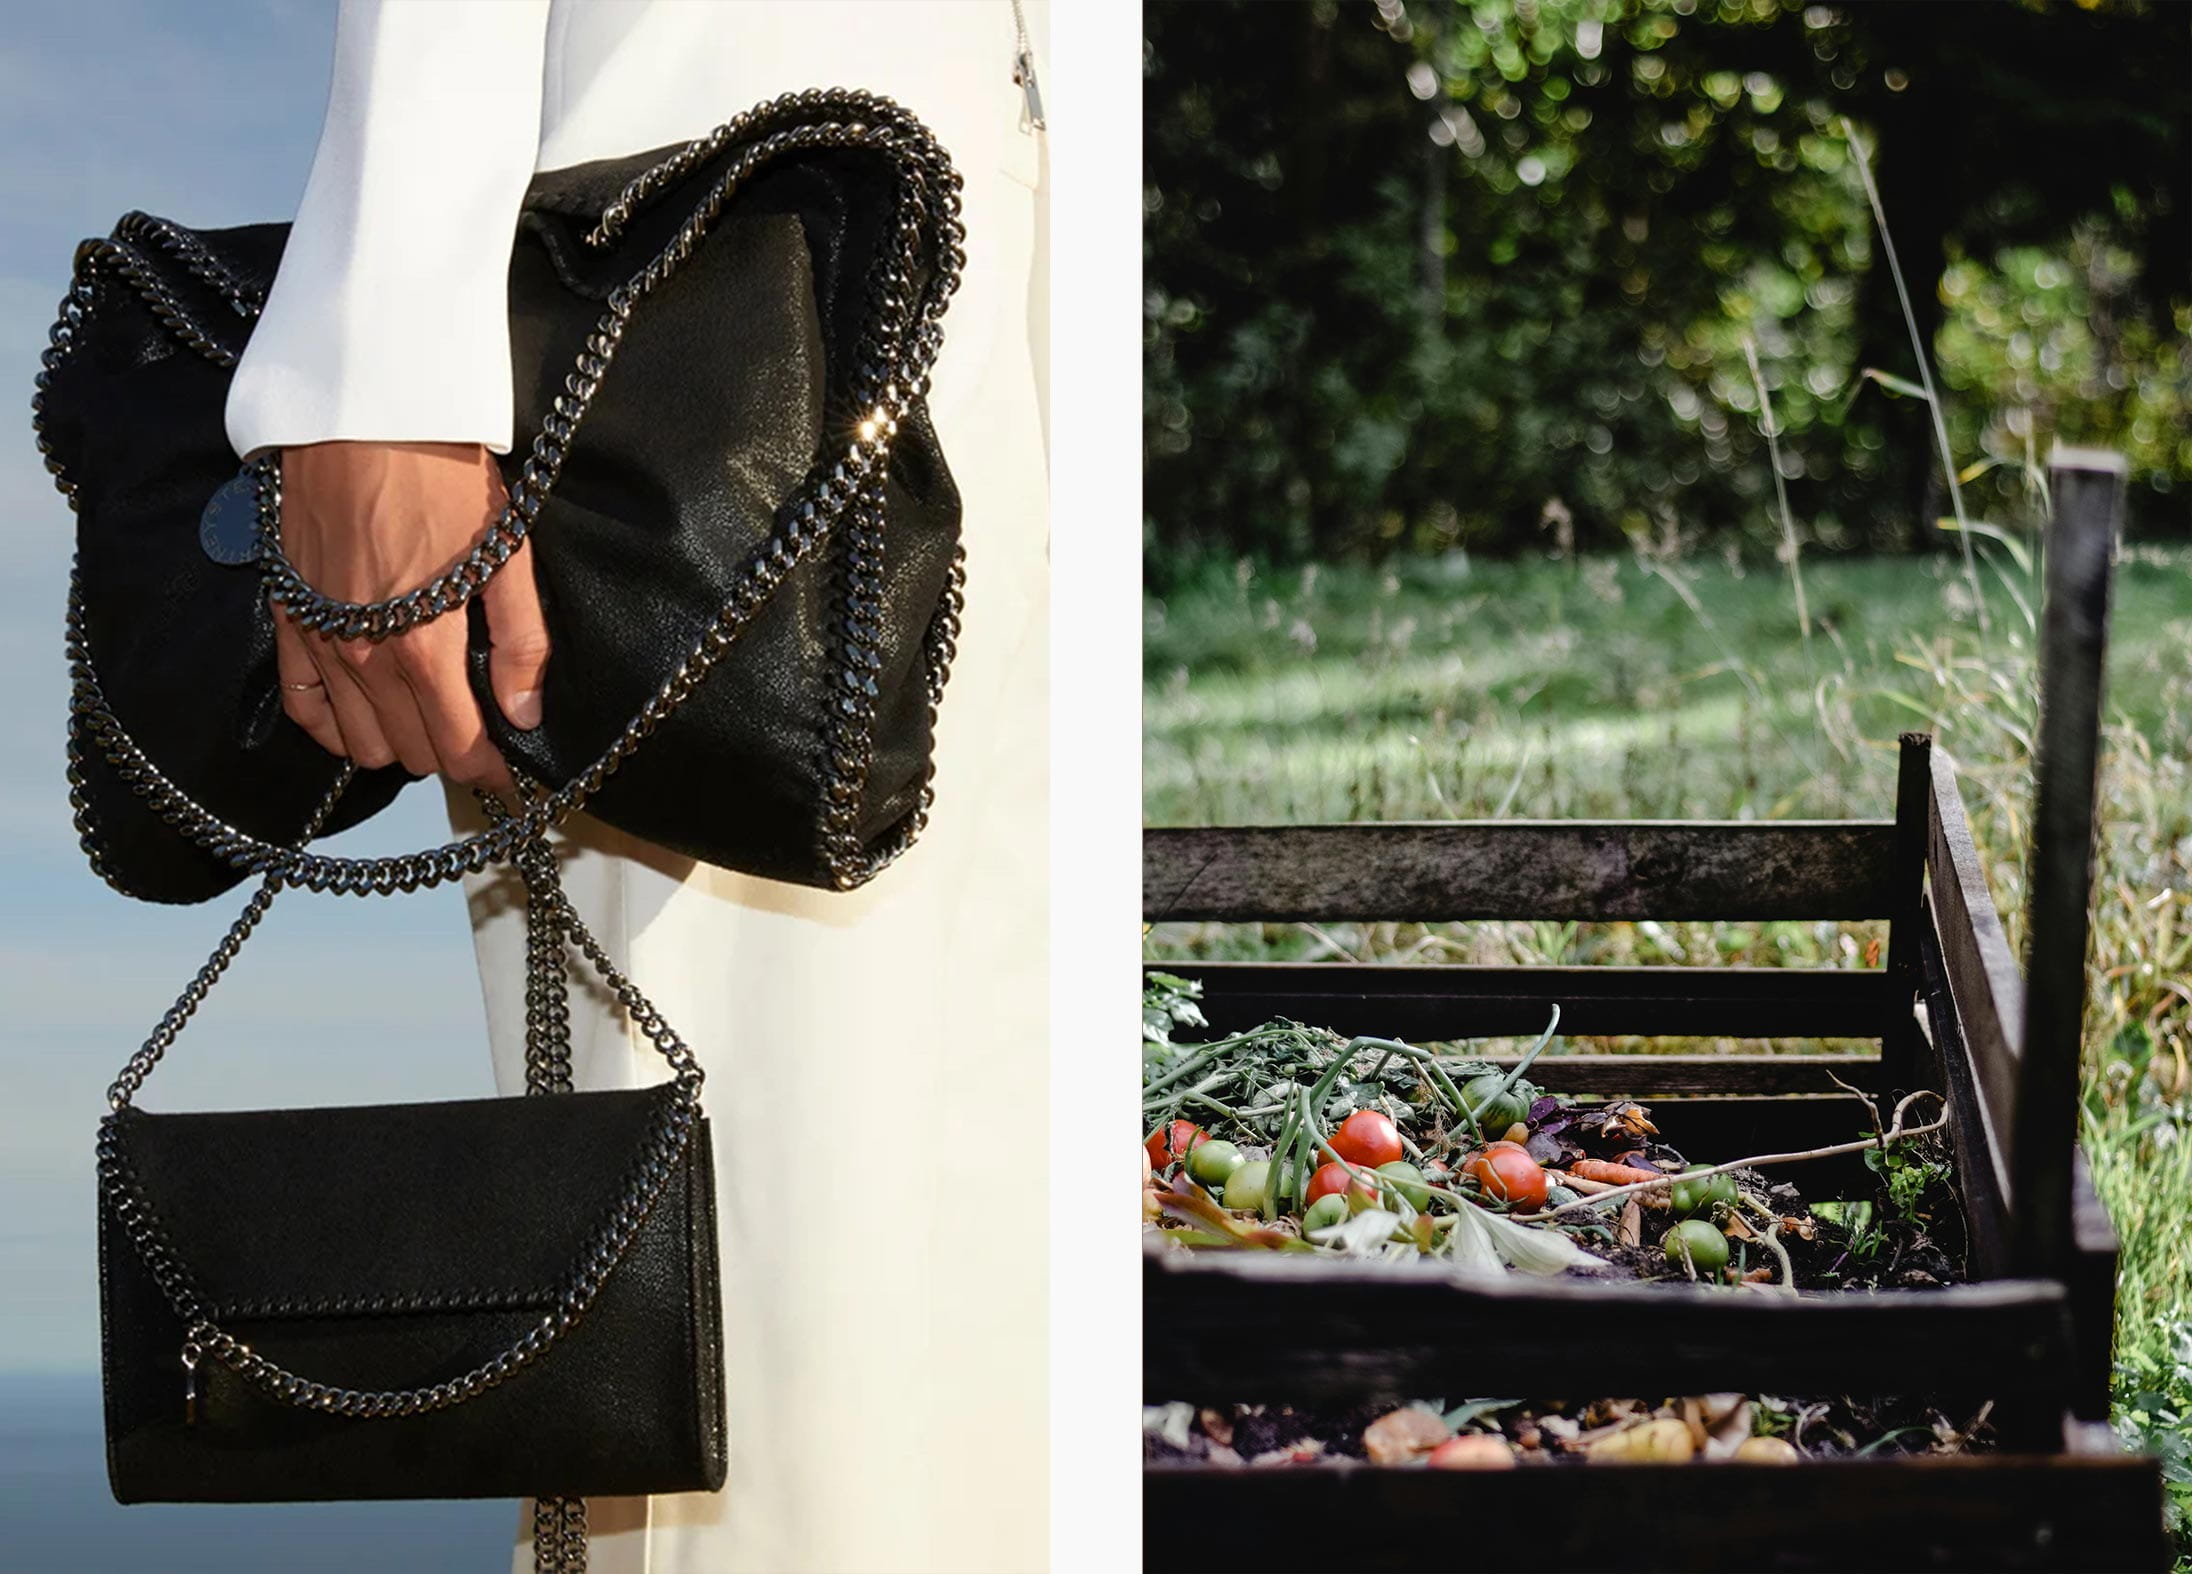 An ethical Stella McCartney bag and compost